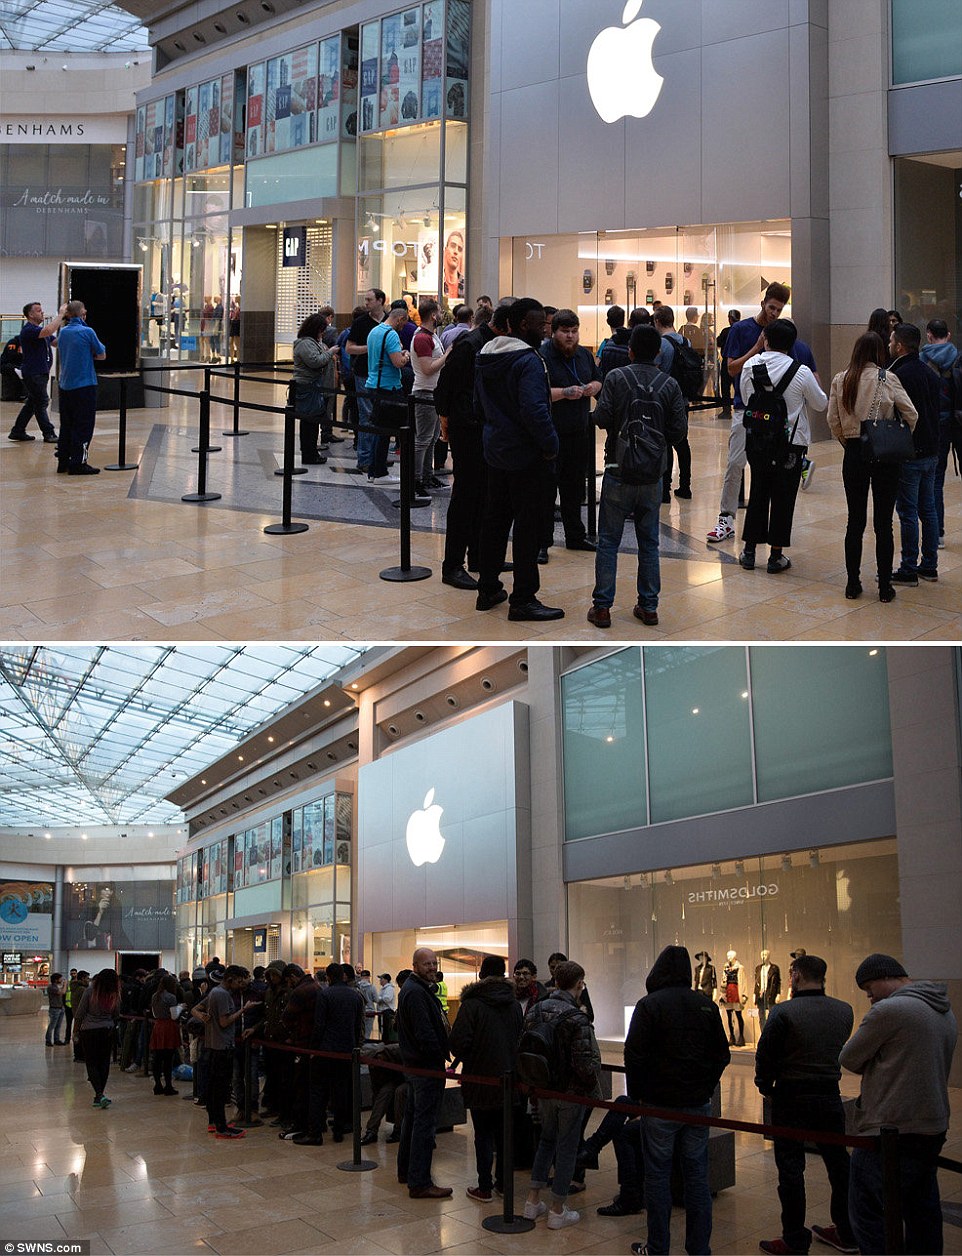 The apple shop in Birmingham's bull ring shopping centre opened to a queue of just 10 people this morning (top) - compared to a larger number last year ahead of the launch of the new iPhone 6S and 6S+ (bottom)